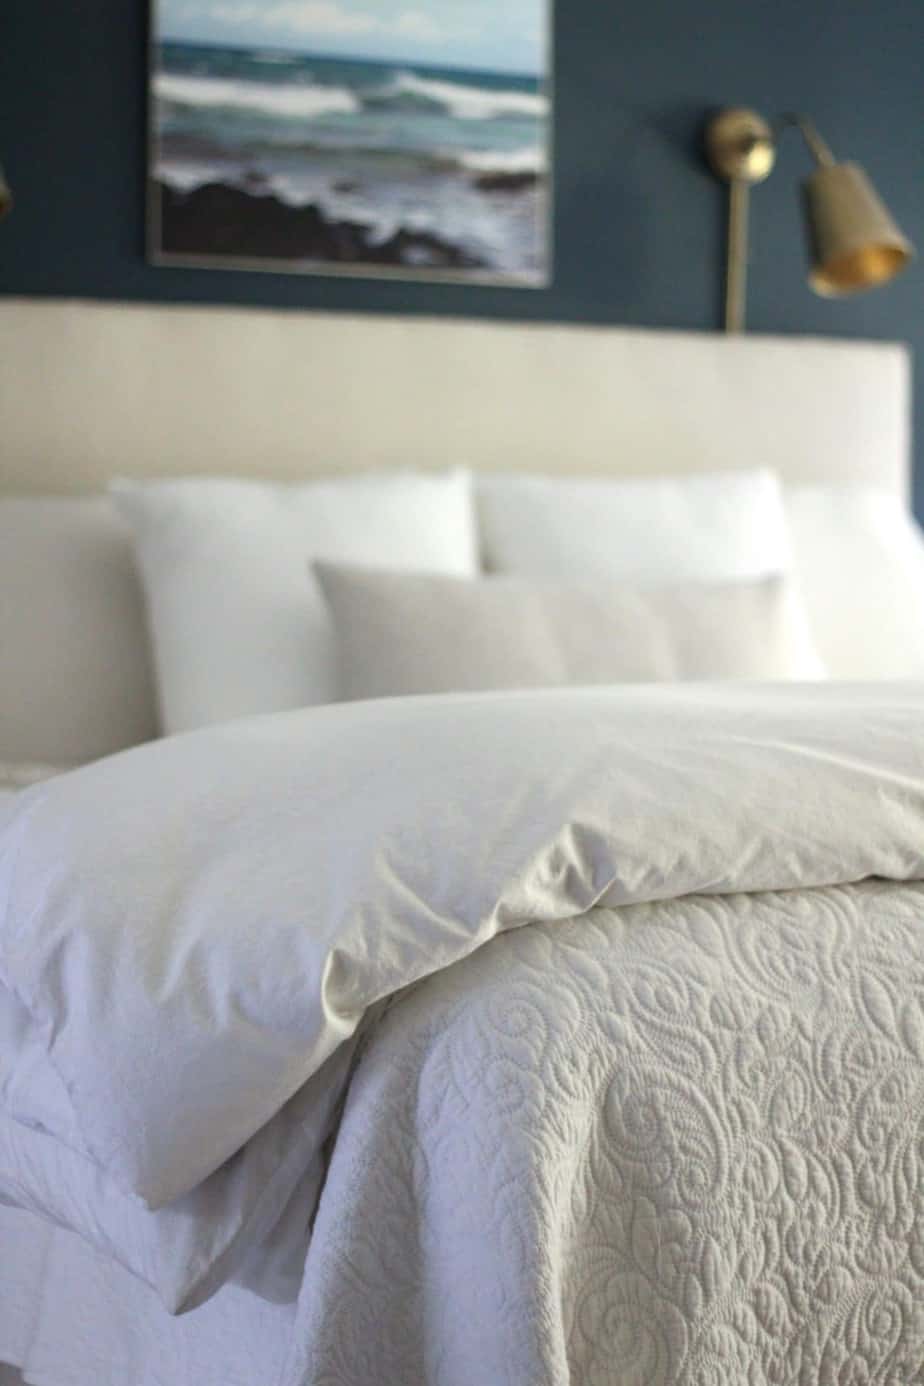 How to Keep Sheets on a Bed: Tips for a Tidy Bed